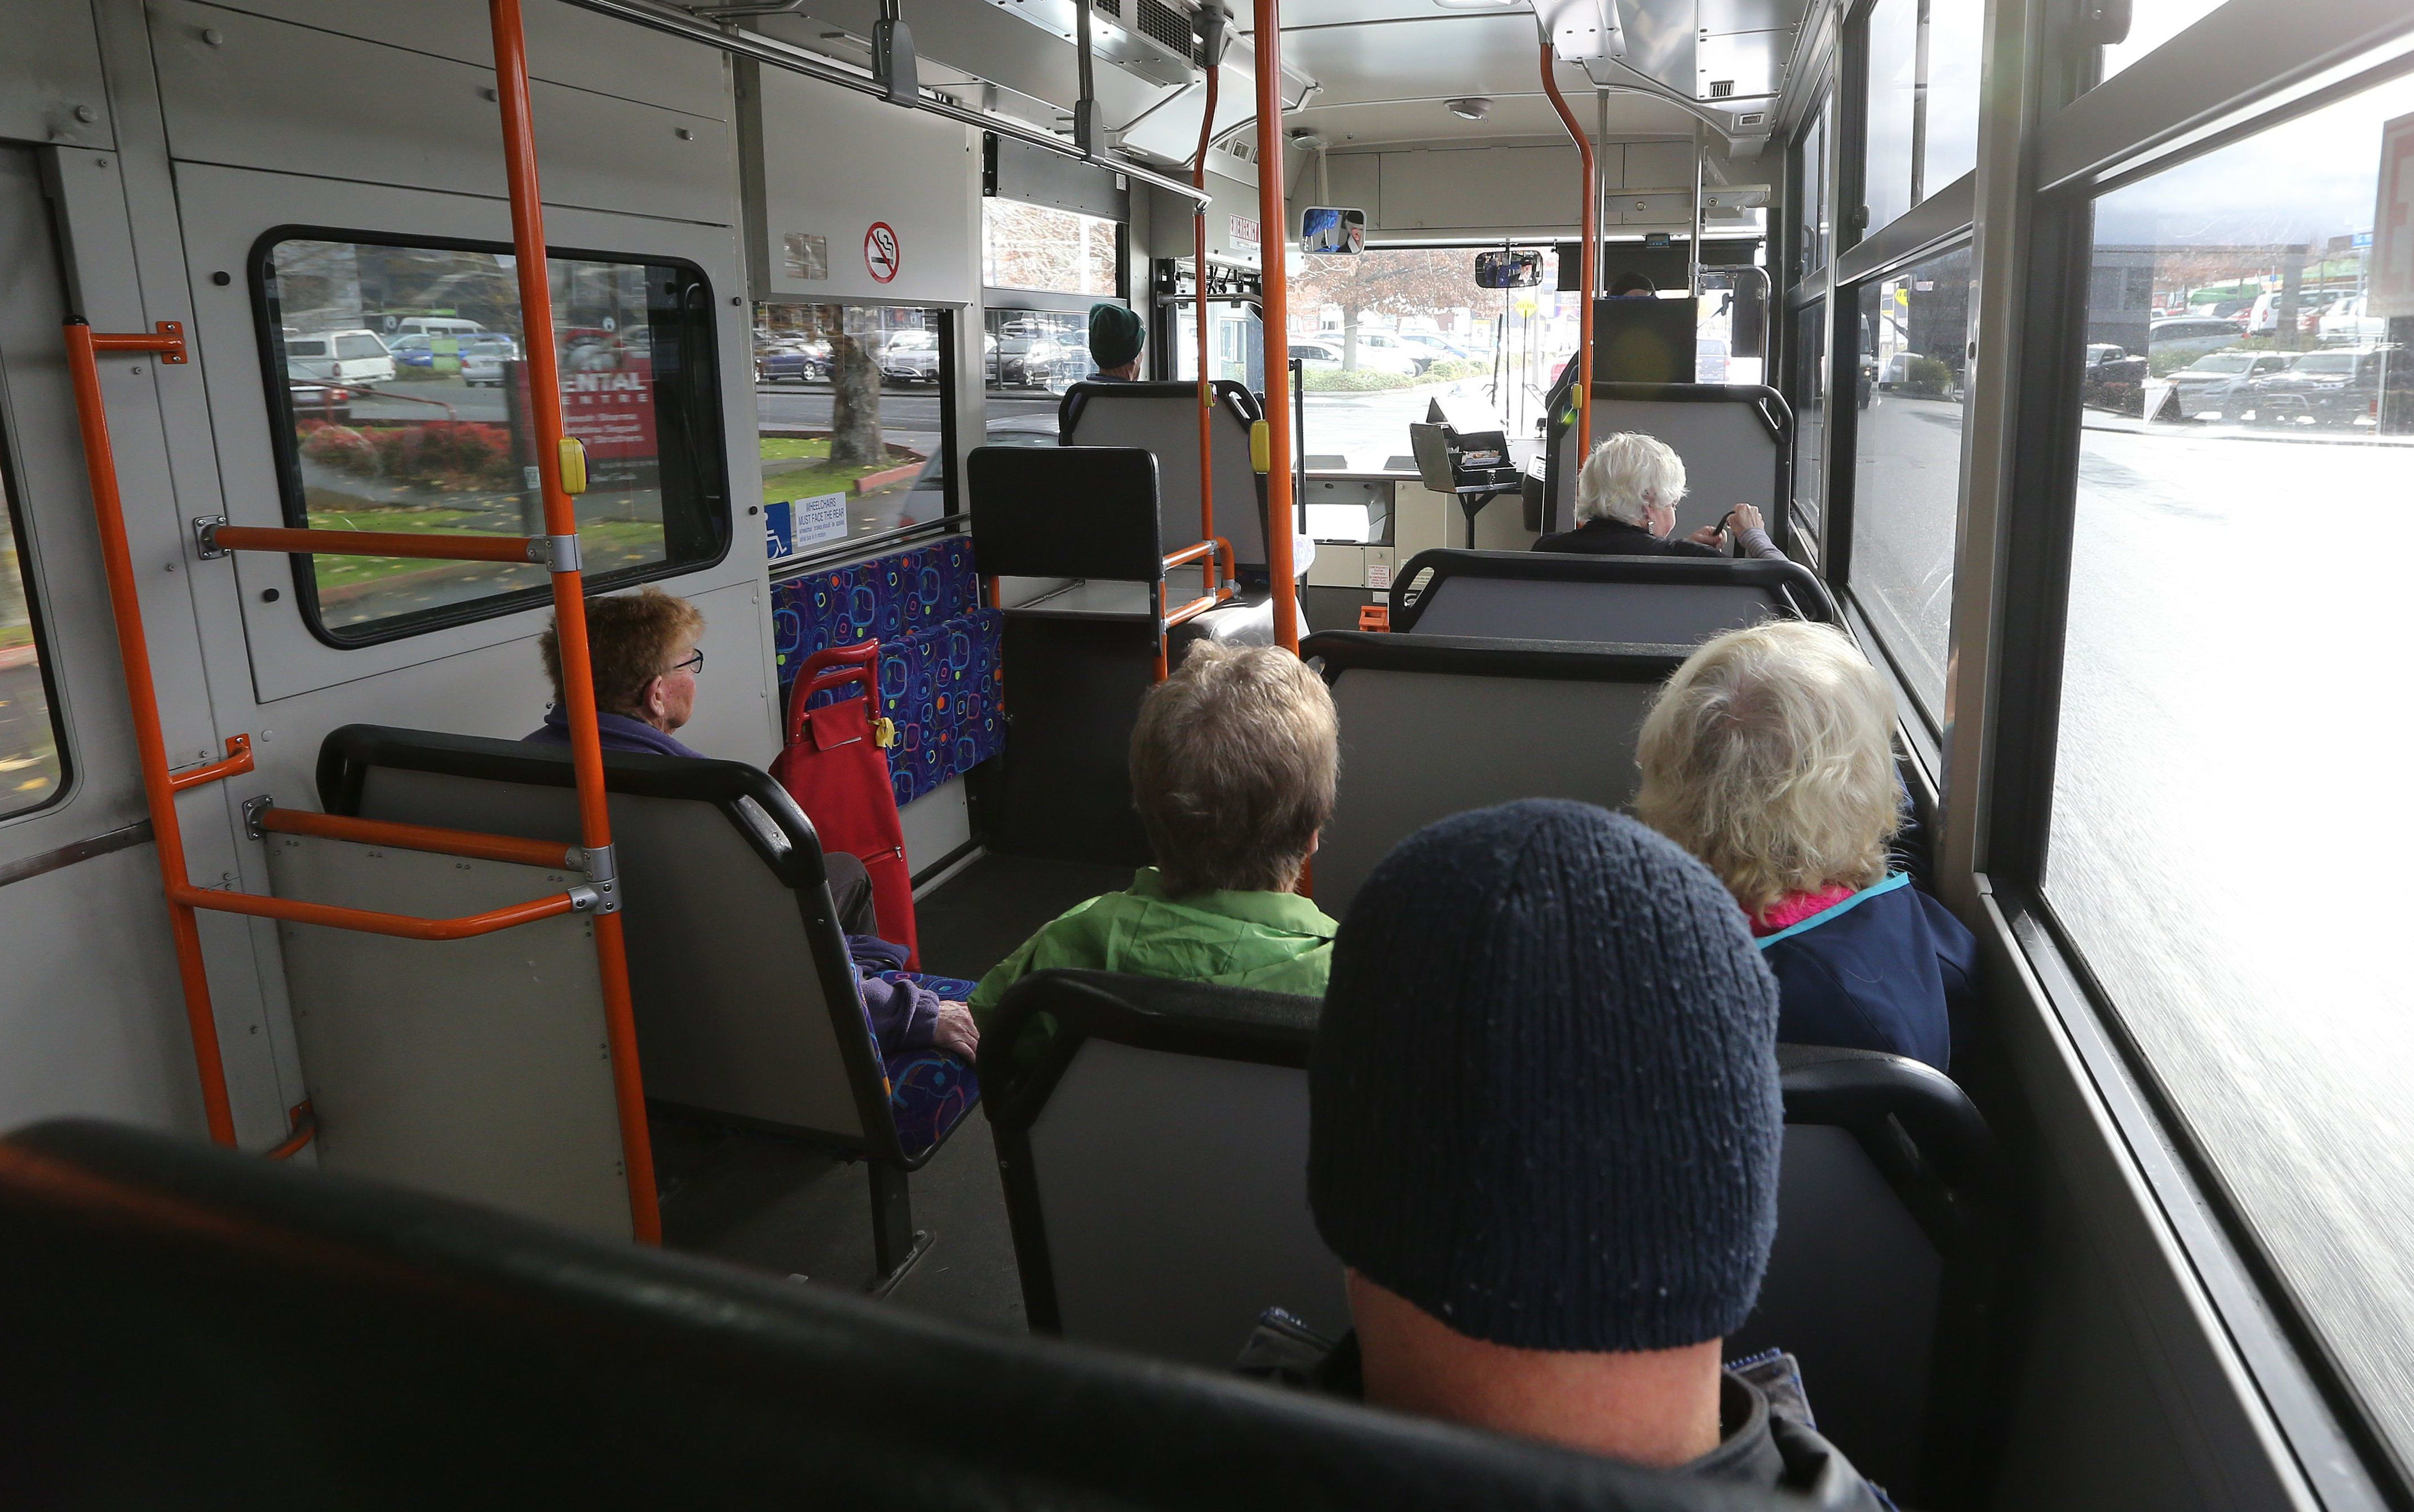 Three new bus routes will be trialed in Marlborough from February, for 18 months. - Blenheim bus, public transport